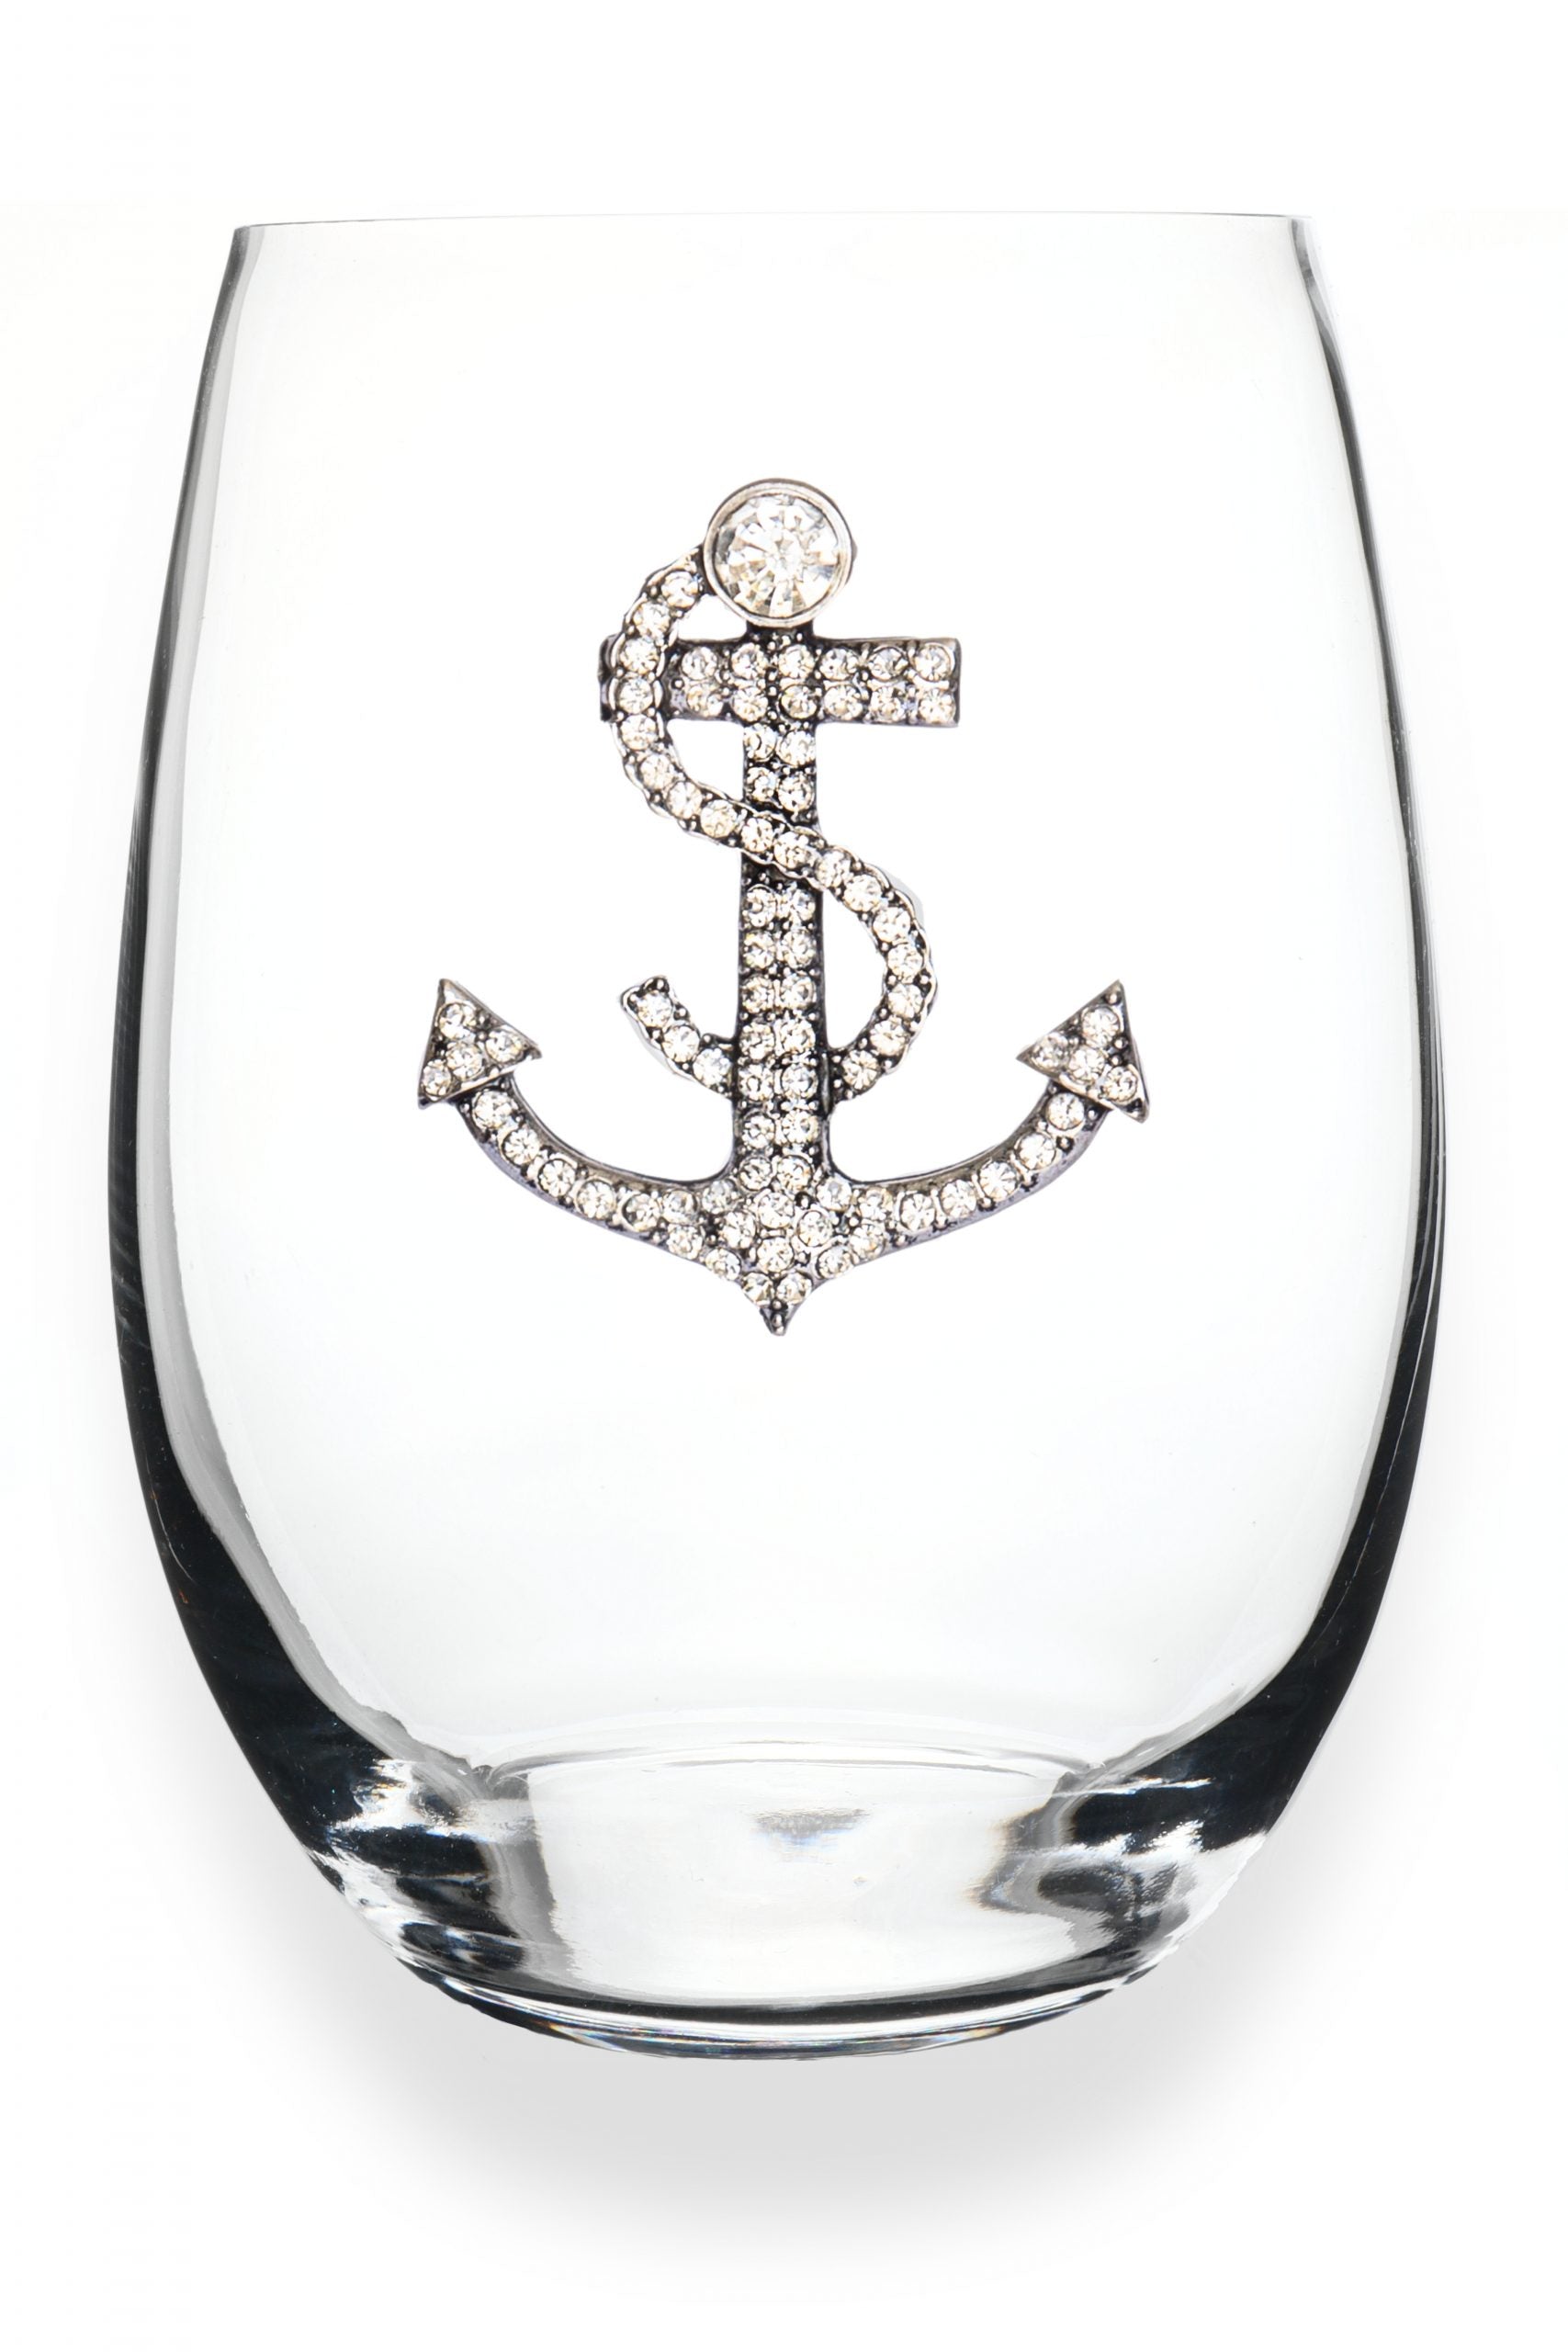 Queens' Jewels Anchor Jeweled Stemless Wine Glass - Sure to become your favorite wine glass!  Also a perfect gift for Birthday's, Housewarmings, etc..  Even prettier in person!